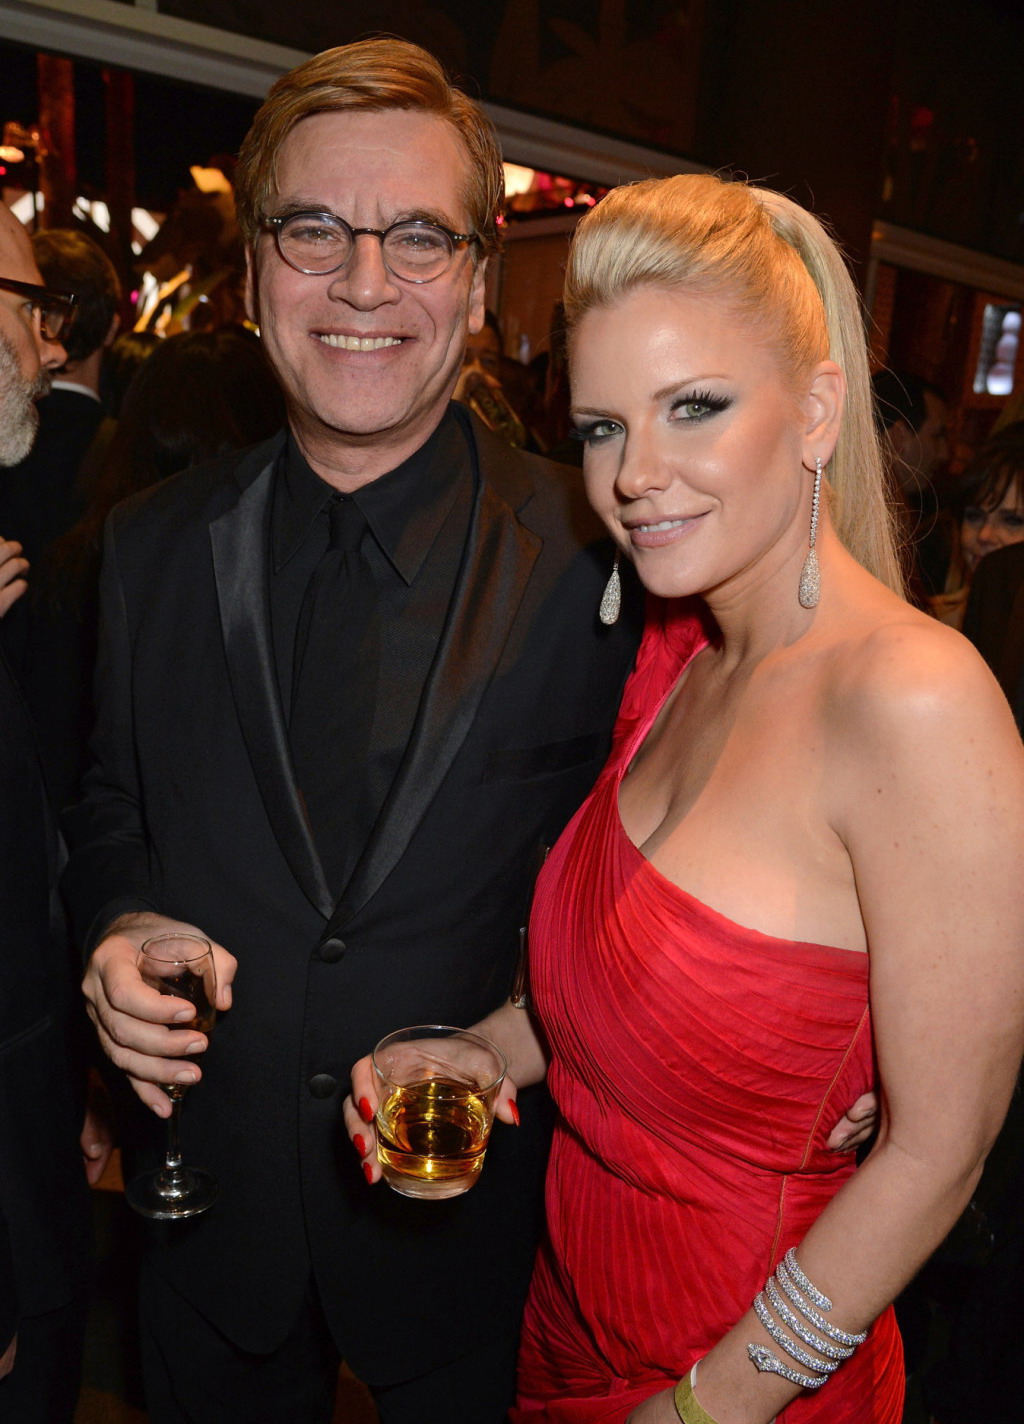 Aaron Sorkin and Carrie Keagan attend the HBO after party at the 70th annual Golden Globe Awards on January 13, 2013 in Los Angeles, California.